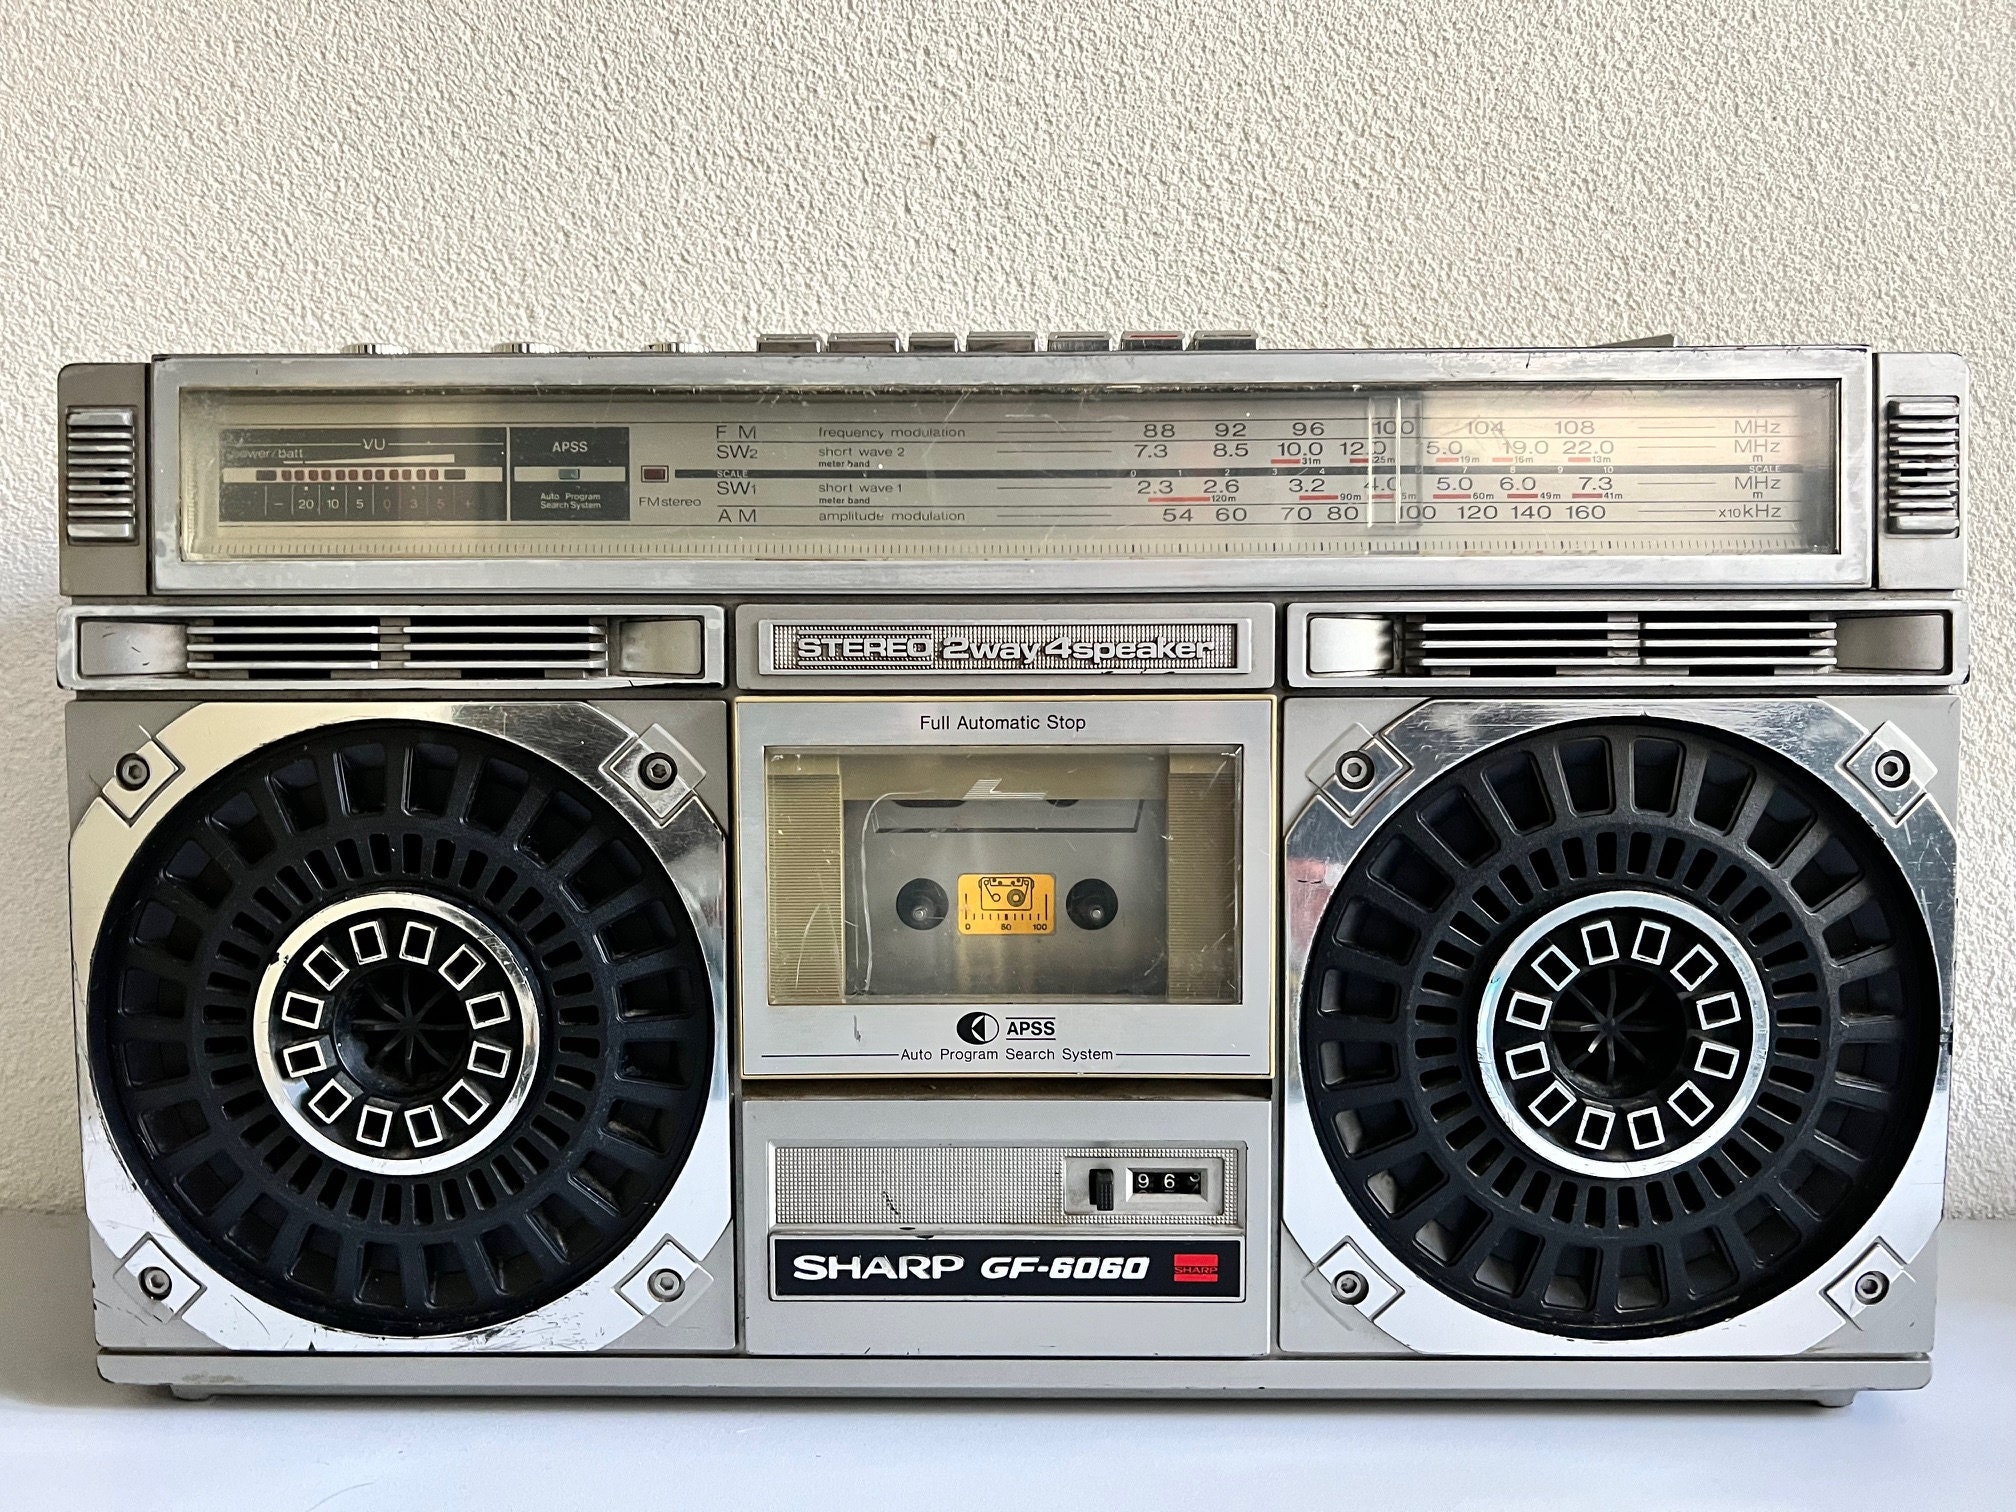 Sony Cfd-s22 Mega Bass CD Player AM FM Radio Cassette Boombox -  Norway